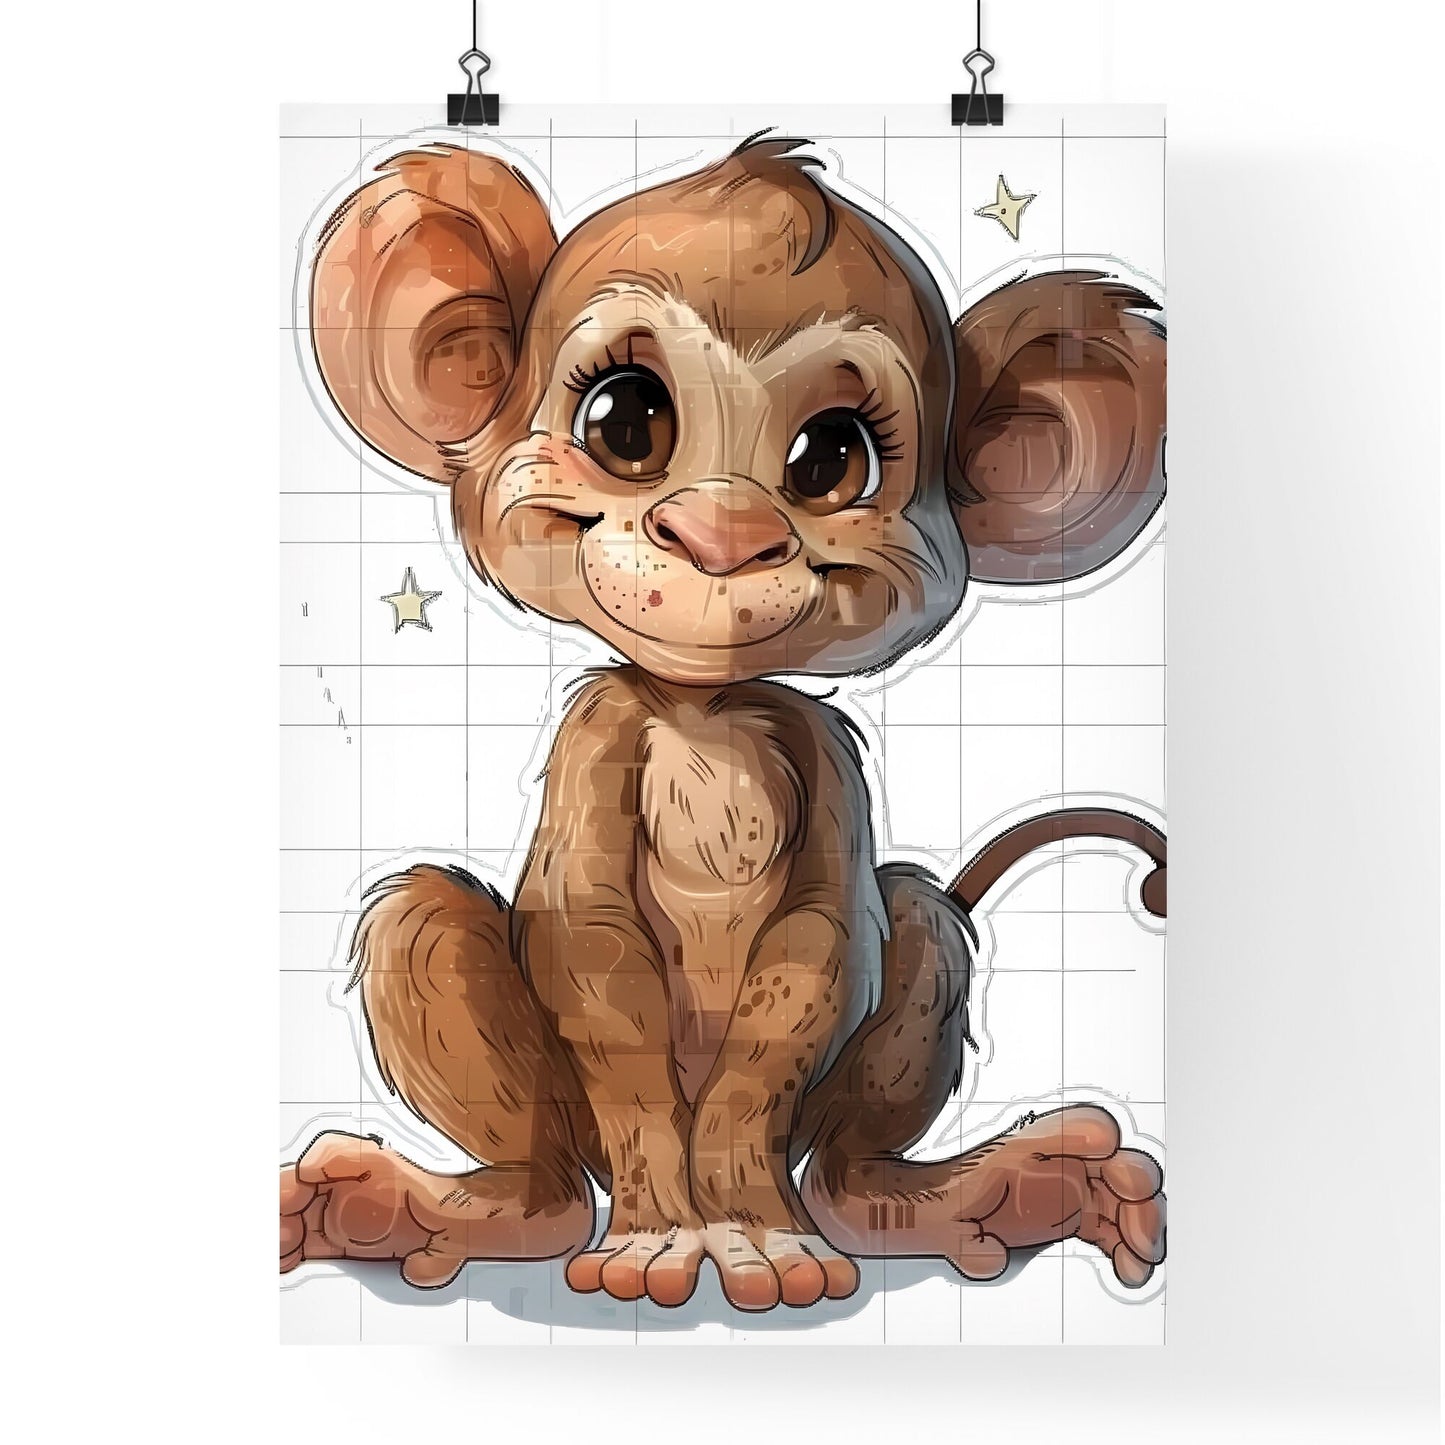 Mischievous Monkey Sticker: Humorous, Lighthearted Animal Expression and Pose in Vibrant Art. Simple, Funny, and Playful Depiction of a Primate. Default Title